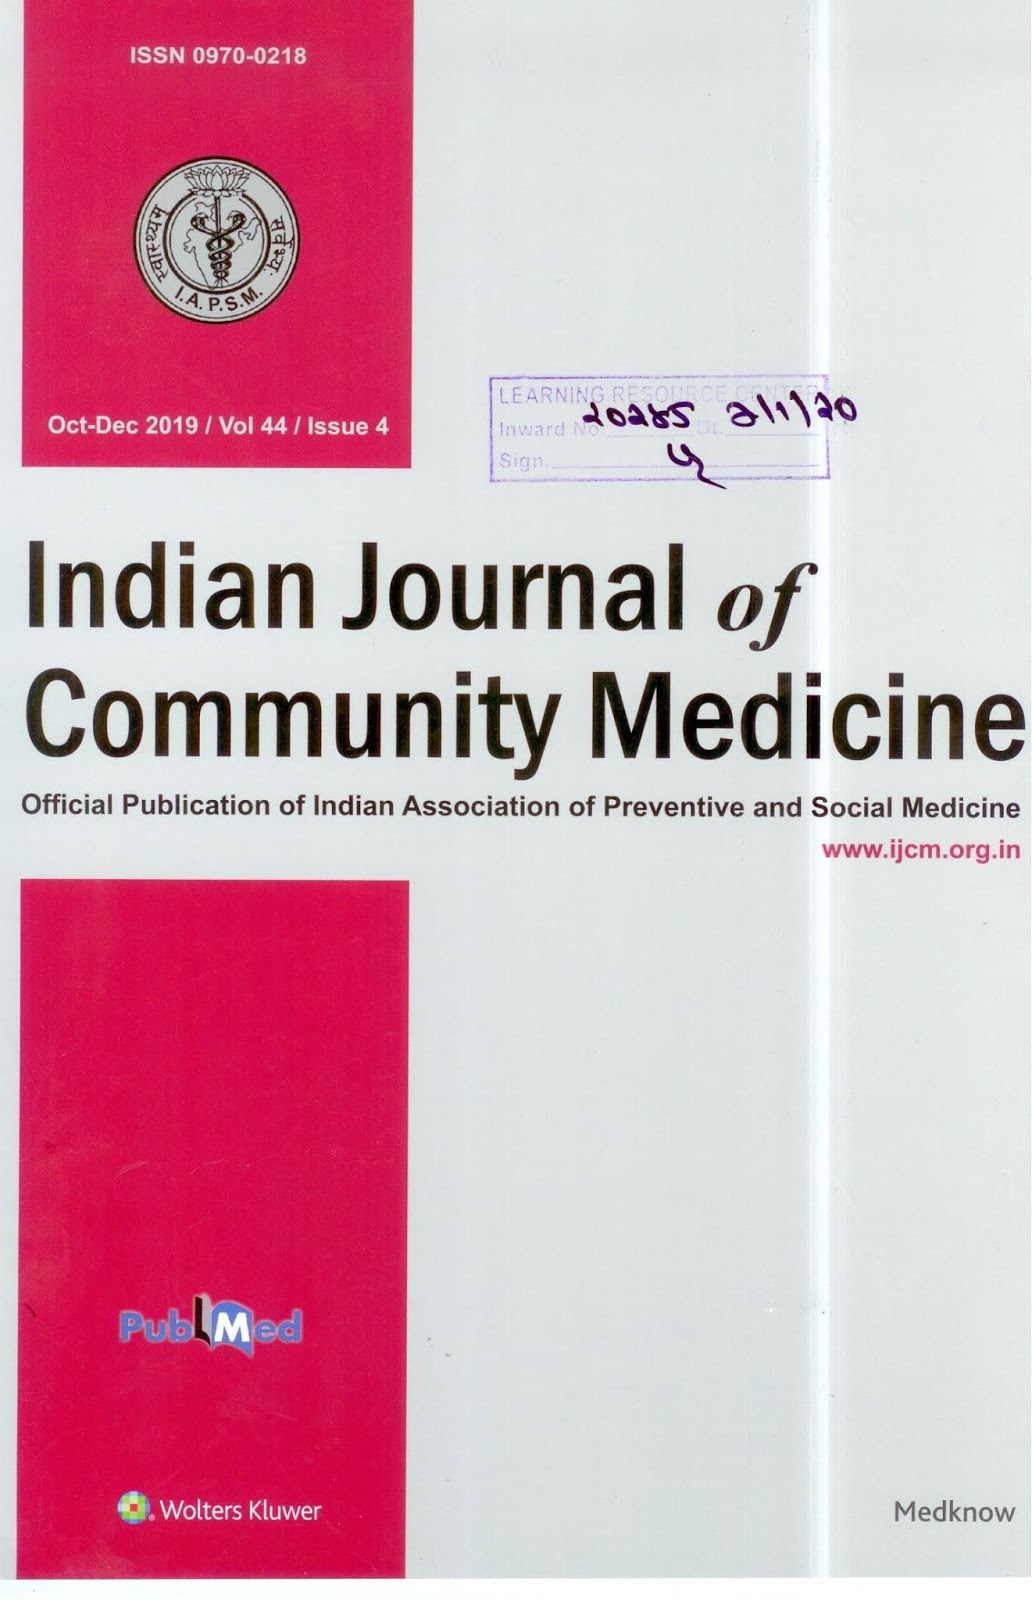 http://www.ijcm.org.in/showBackIssue.asp?issn=0970-0218;year=2019;volume=44;issue=4;month=October-December